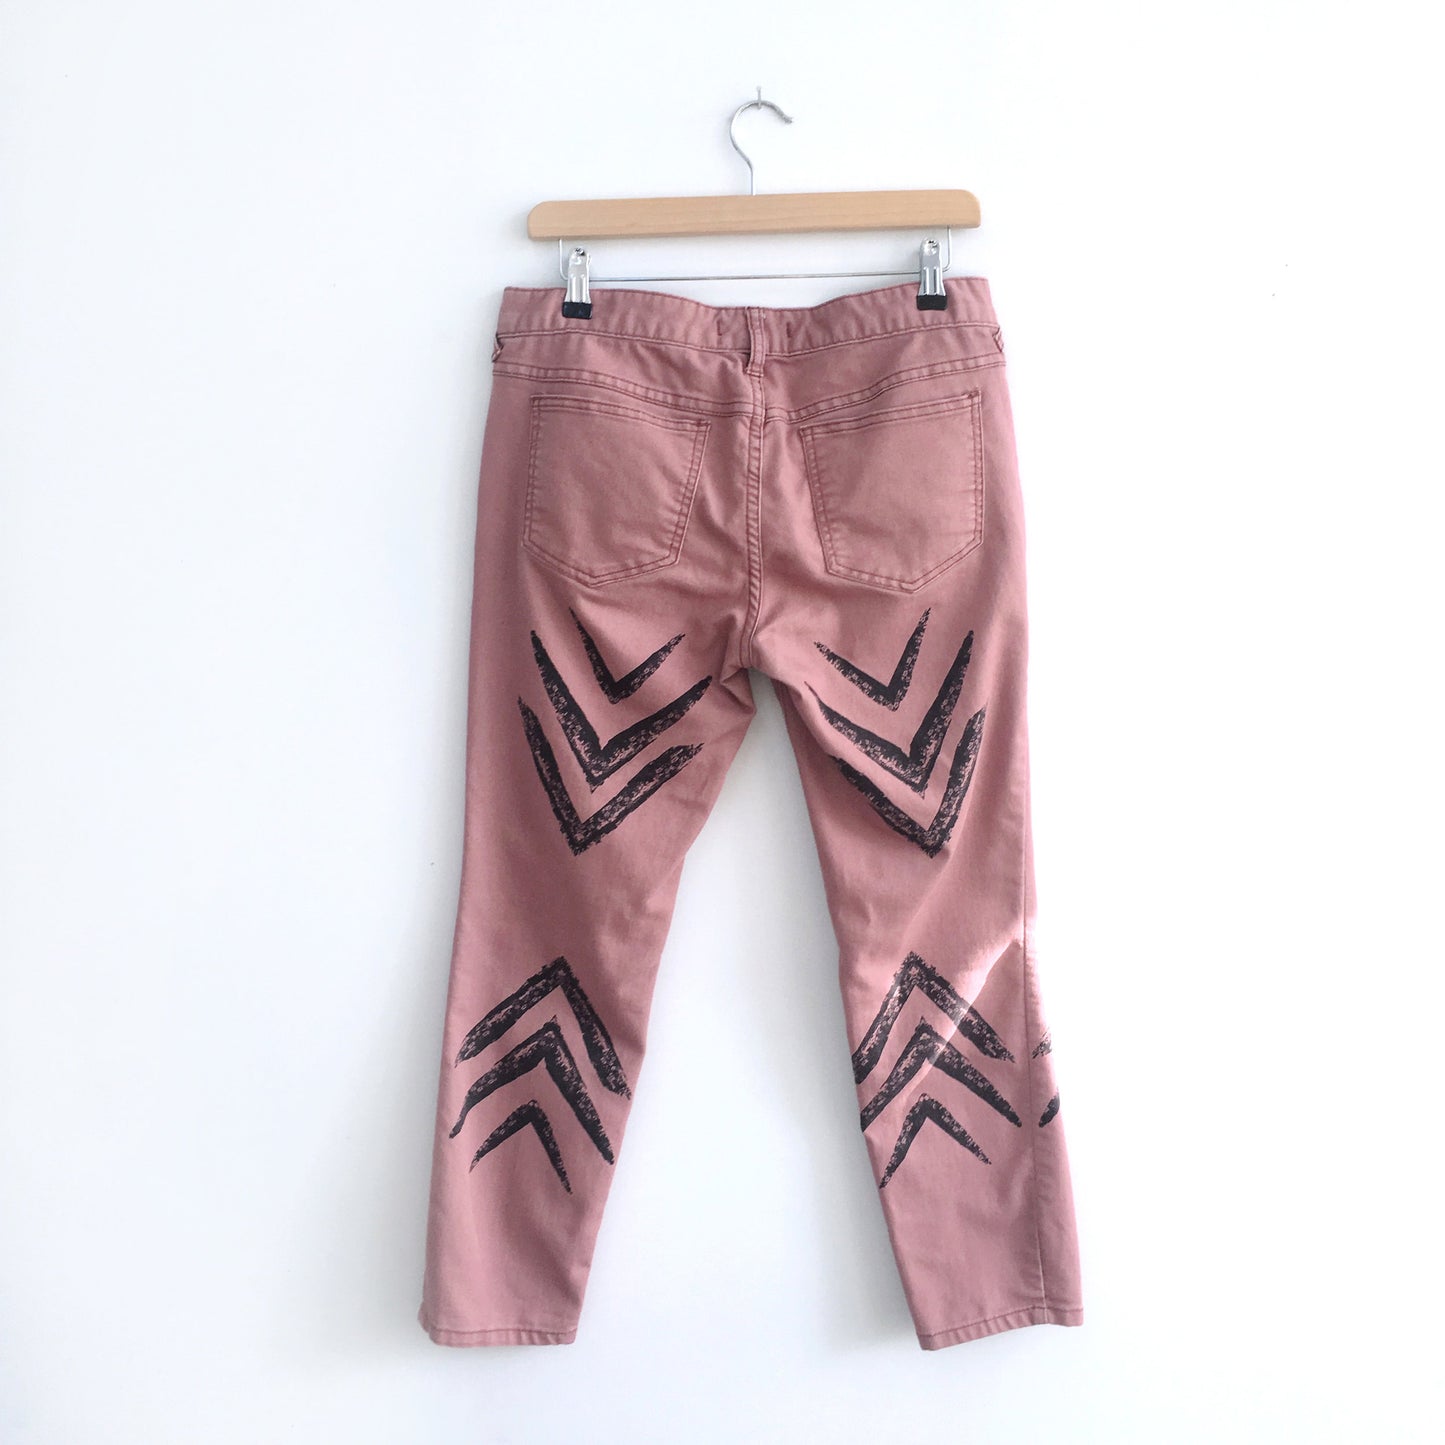 Free People Dotted Ikat Skinnies - size 30